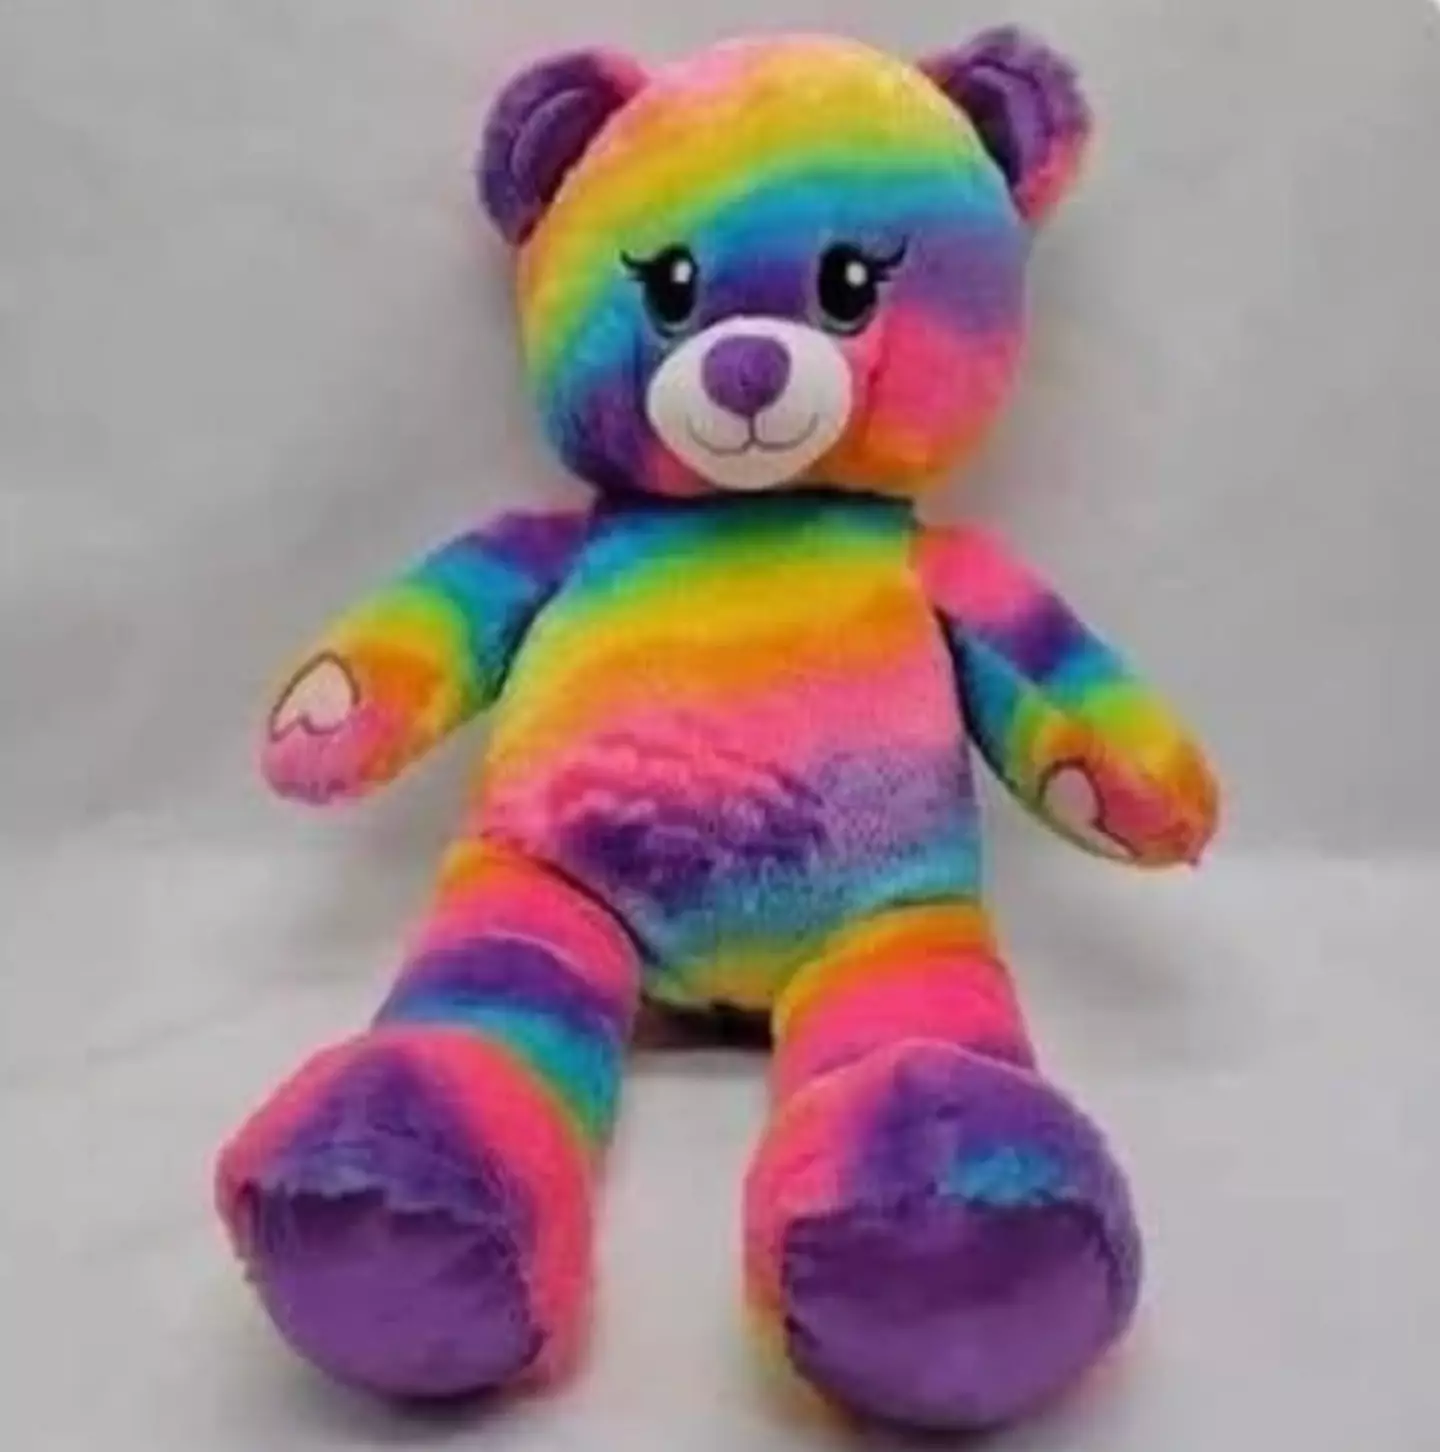 Build-A-Bear kindly decided to make a replica of the rainbow teddy for the young girl.